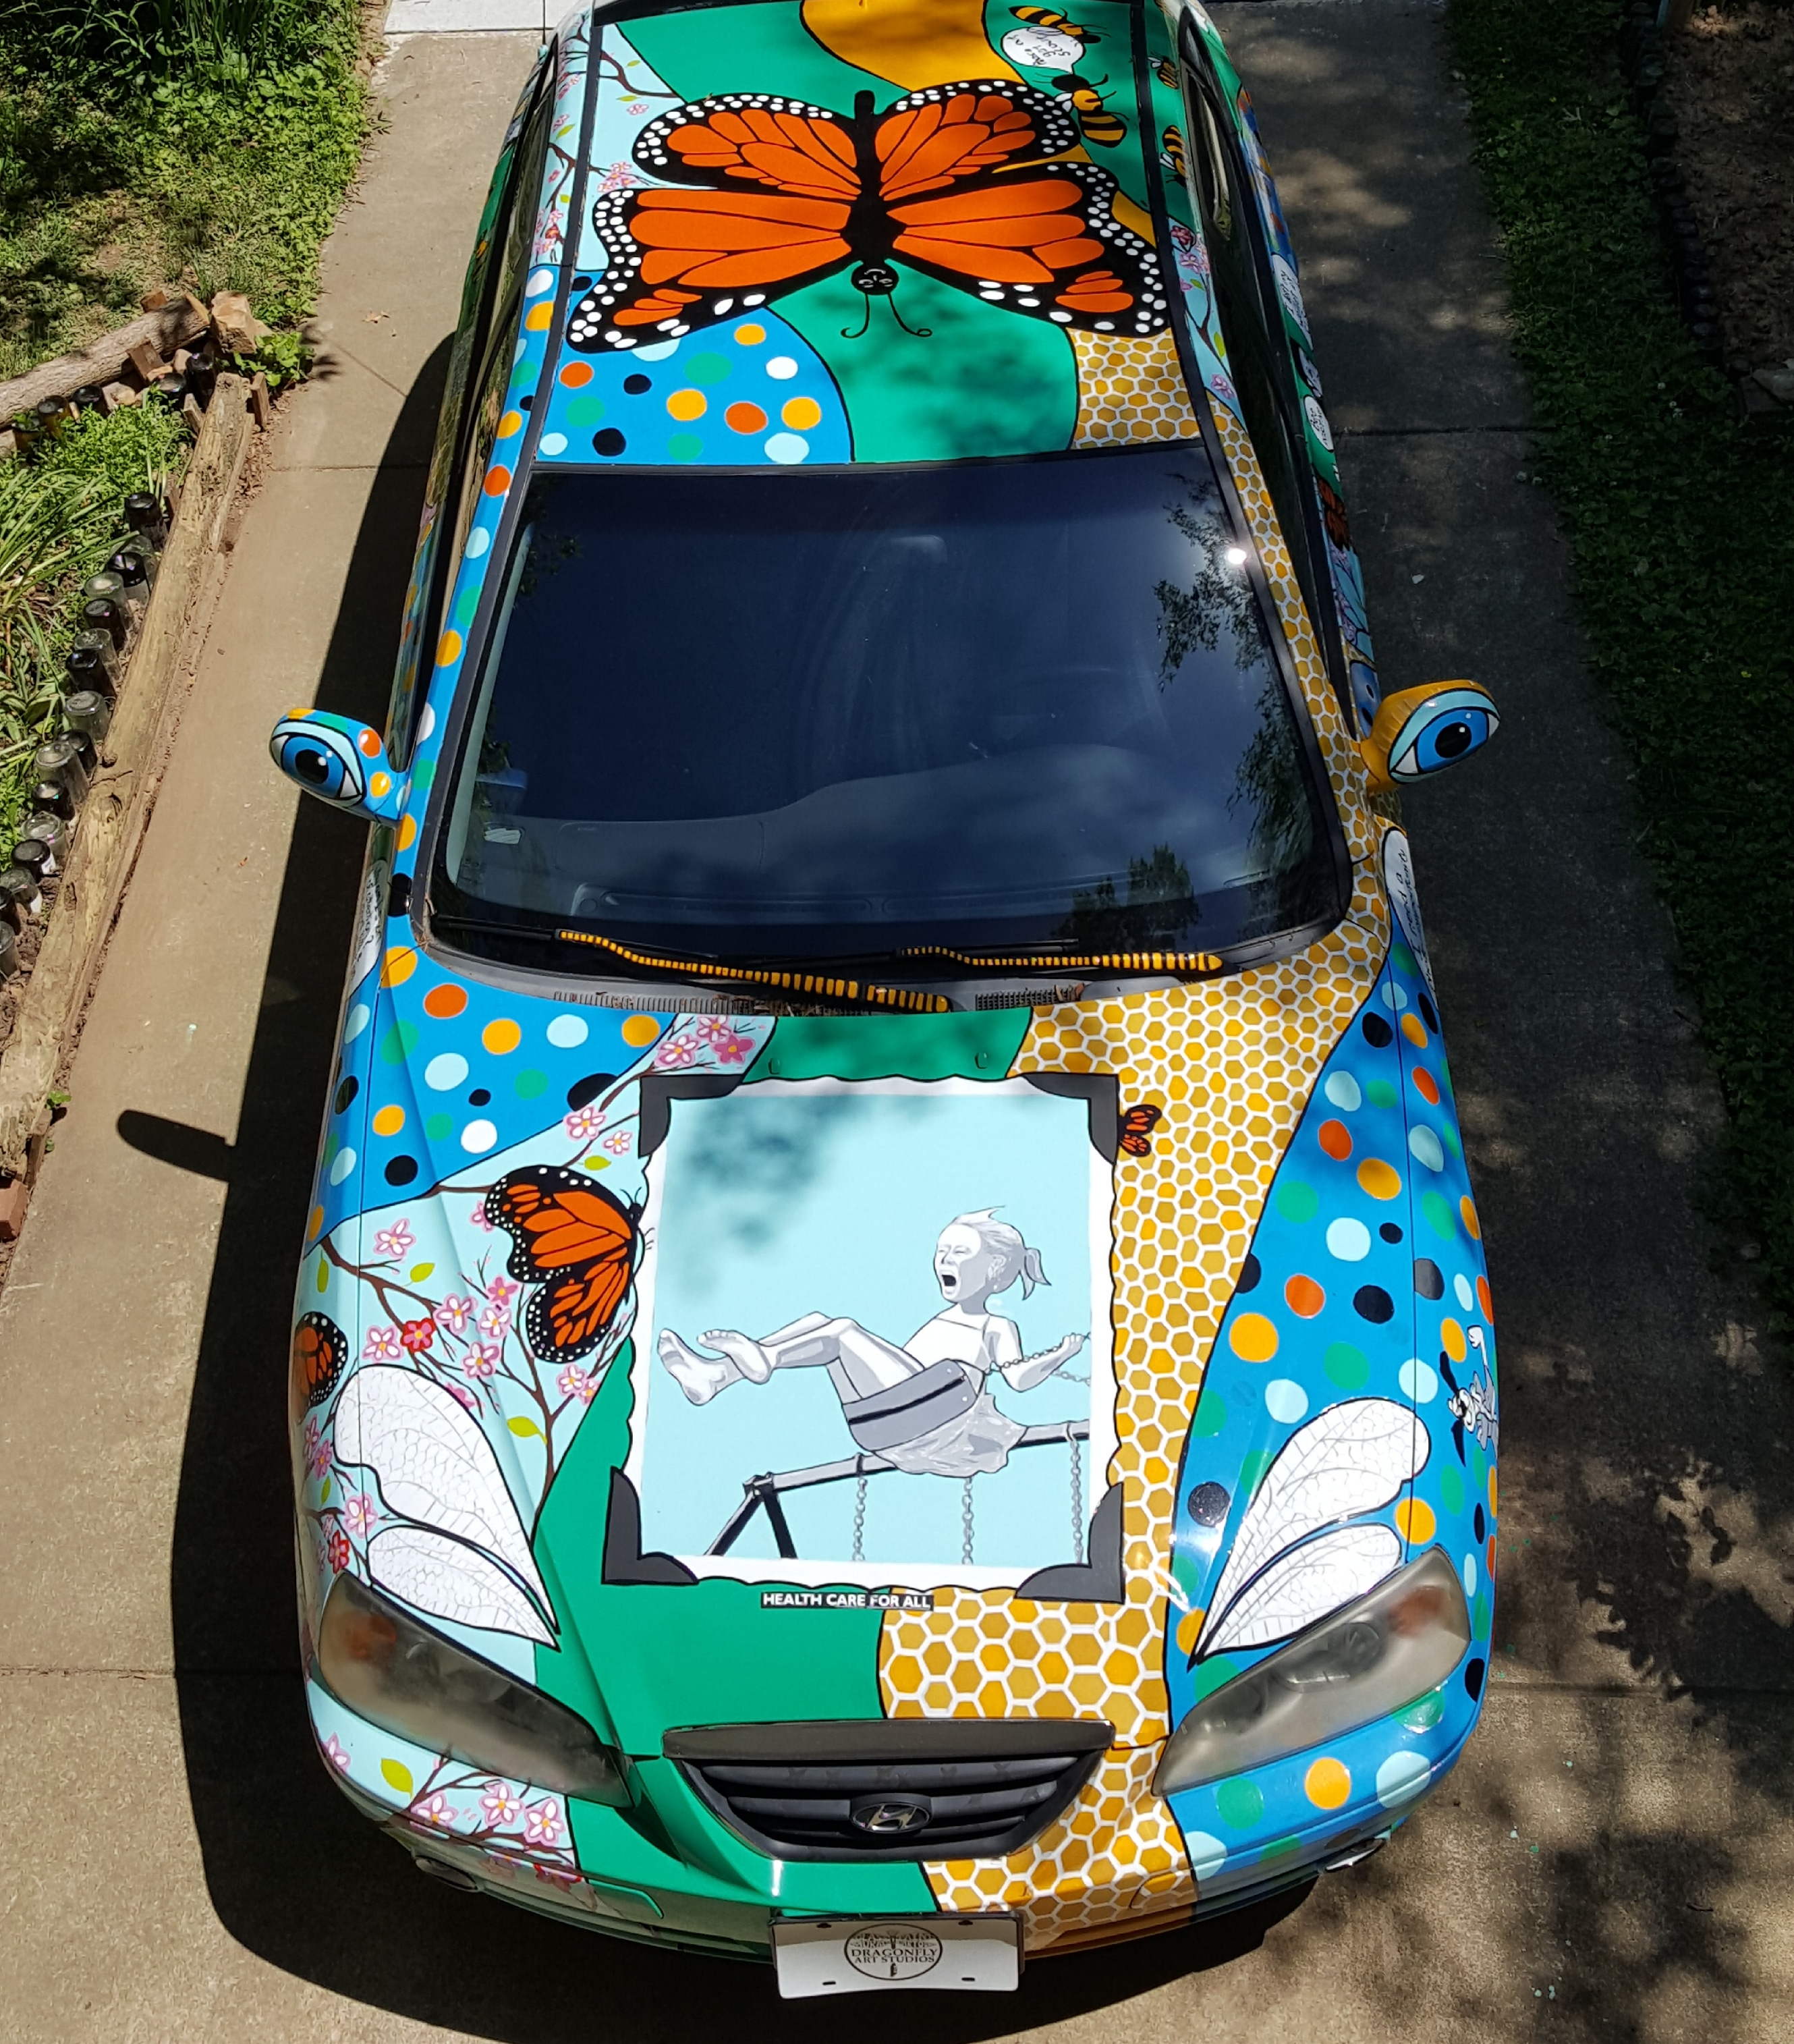 Fresh paint on the Art Car. Photo by Dragonfly Leathrum